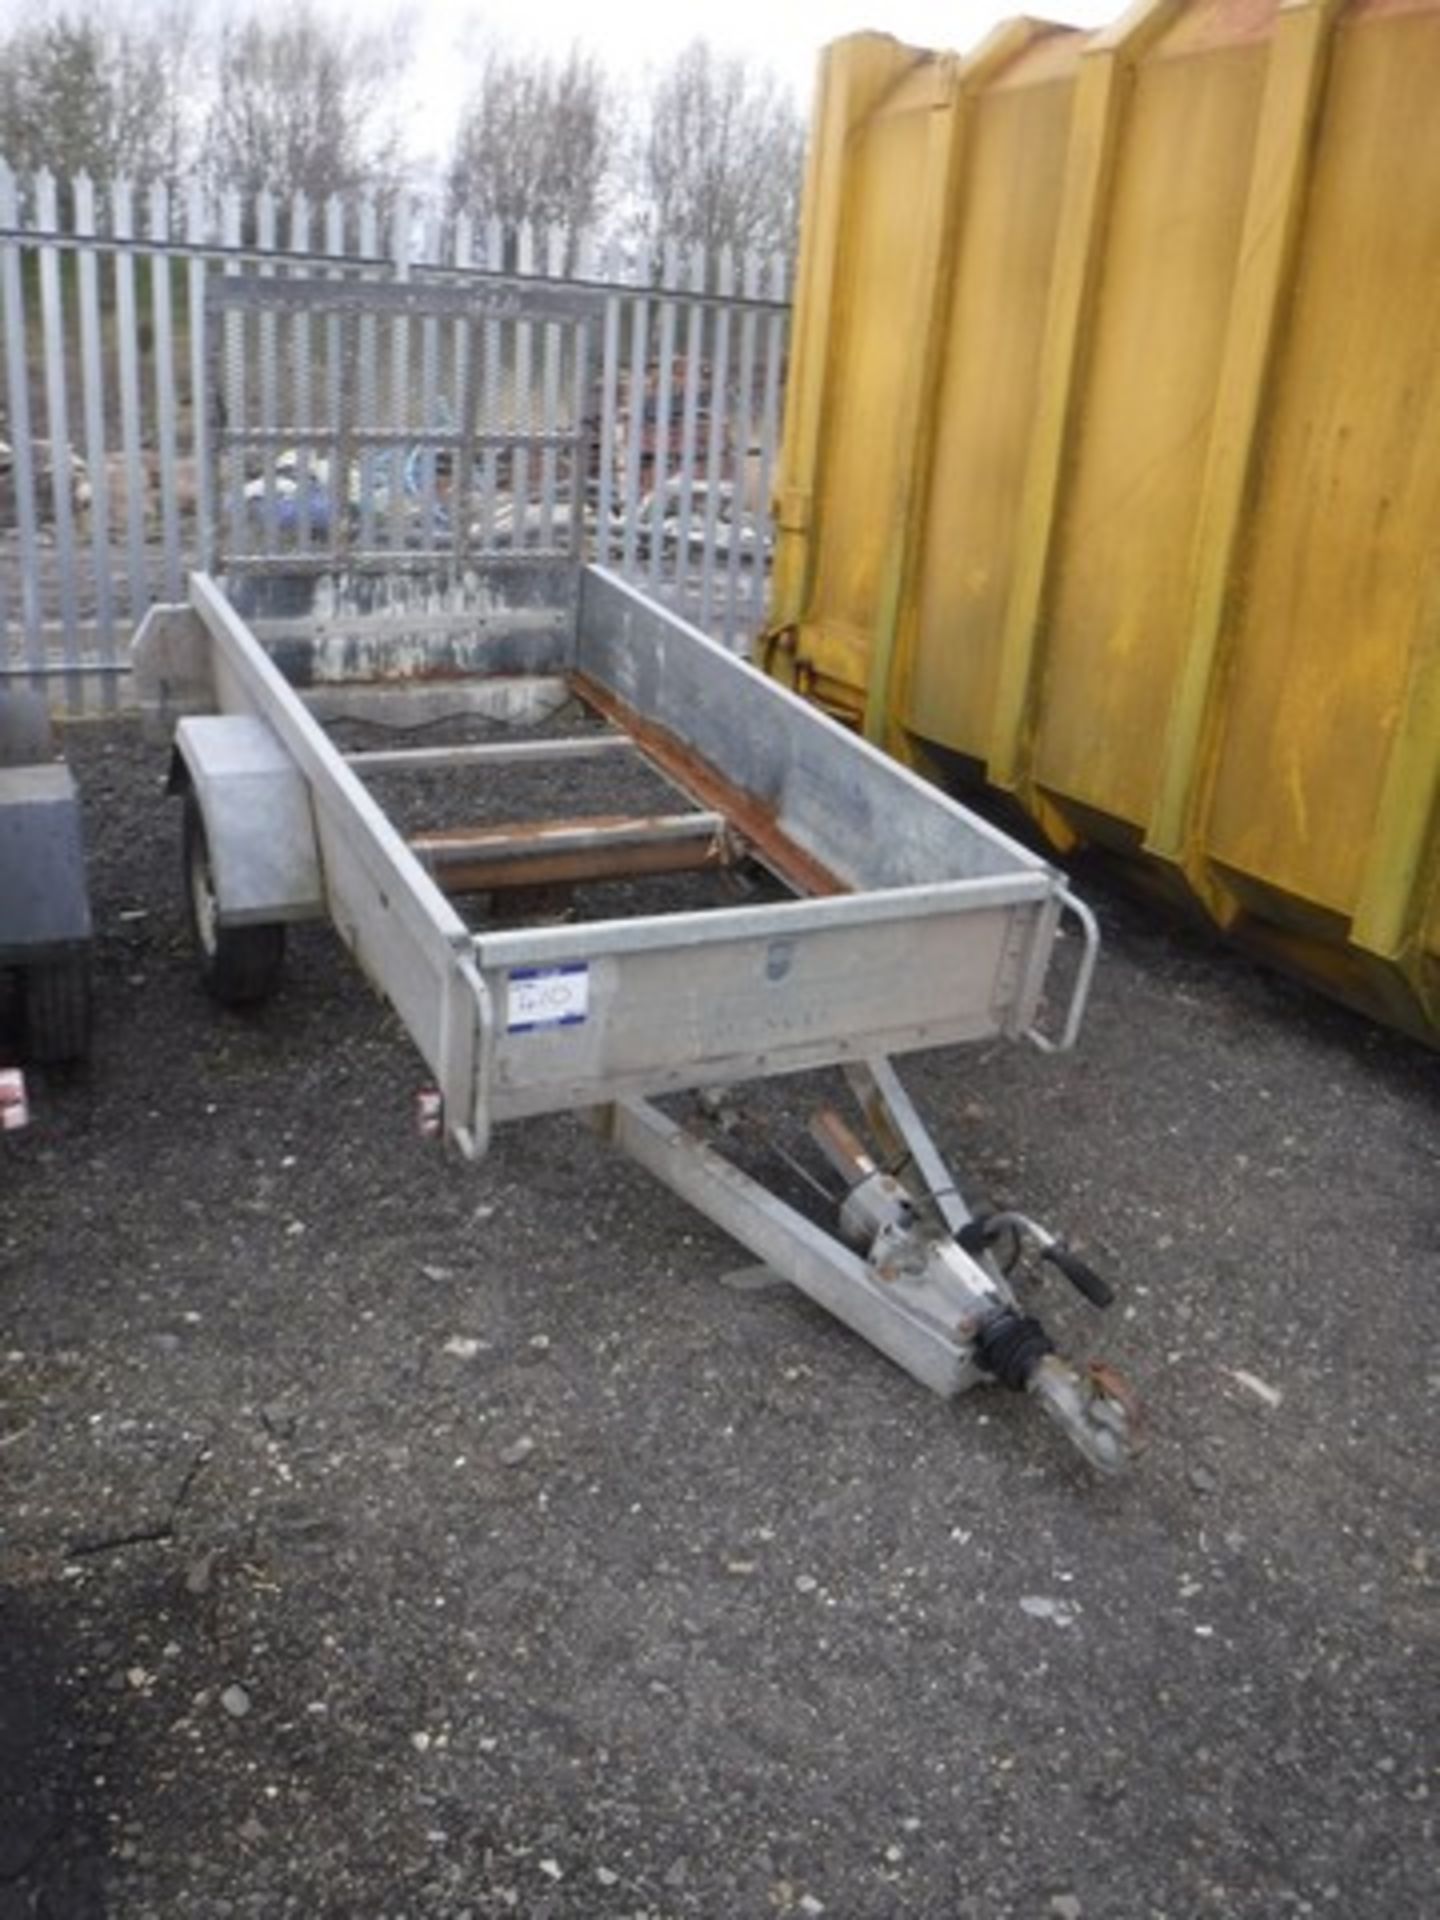 INDESPENSION 8&#39; x 4&#39; twin axle plant trailer. Asset No P147/97. Requires new floor